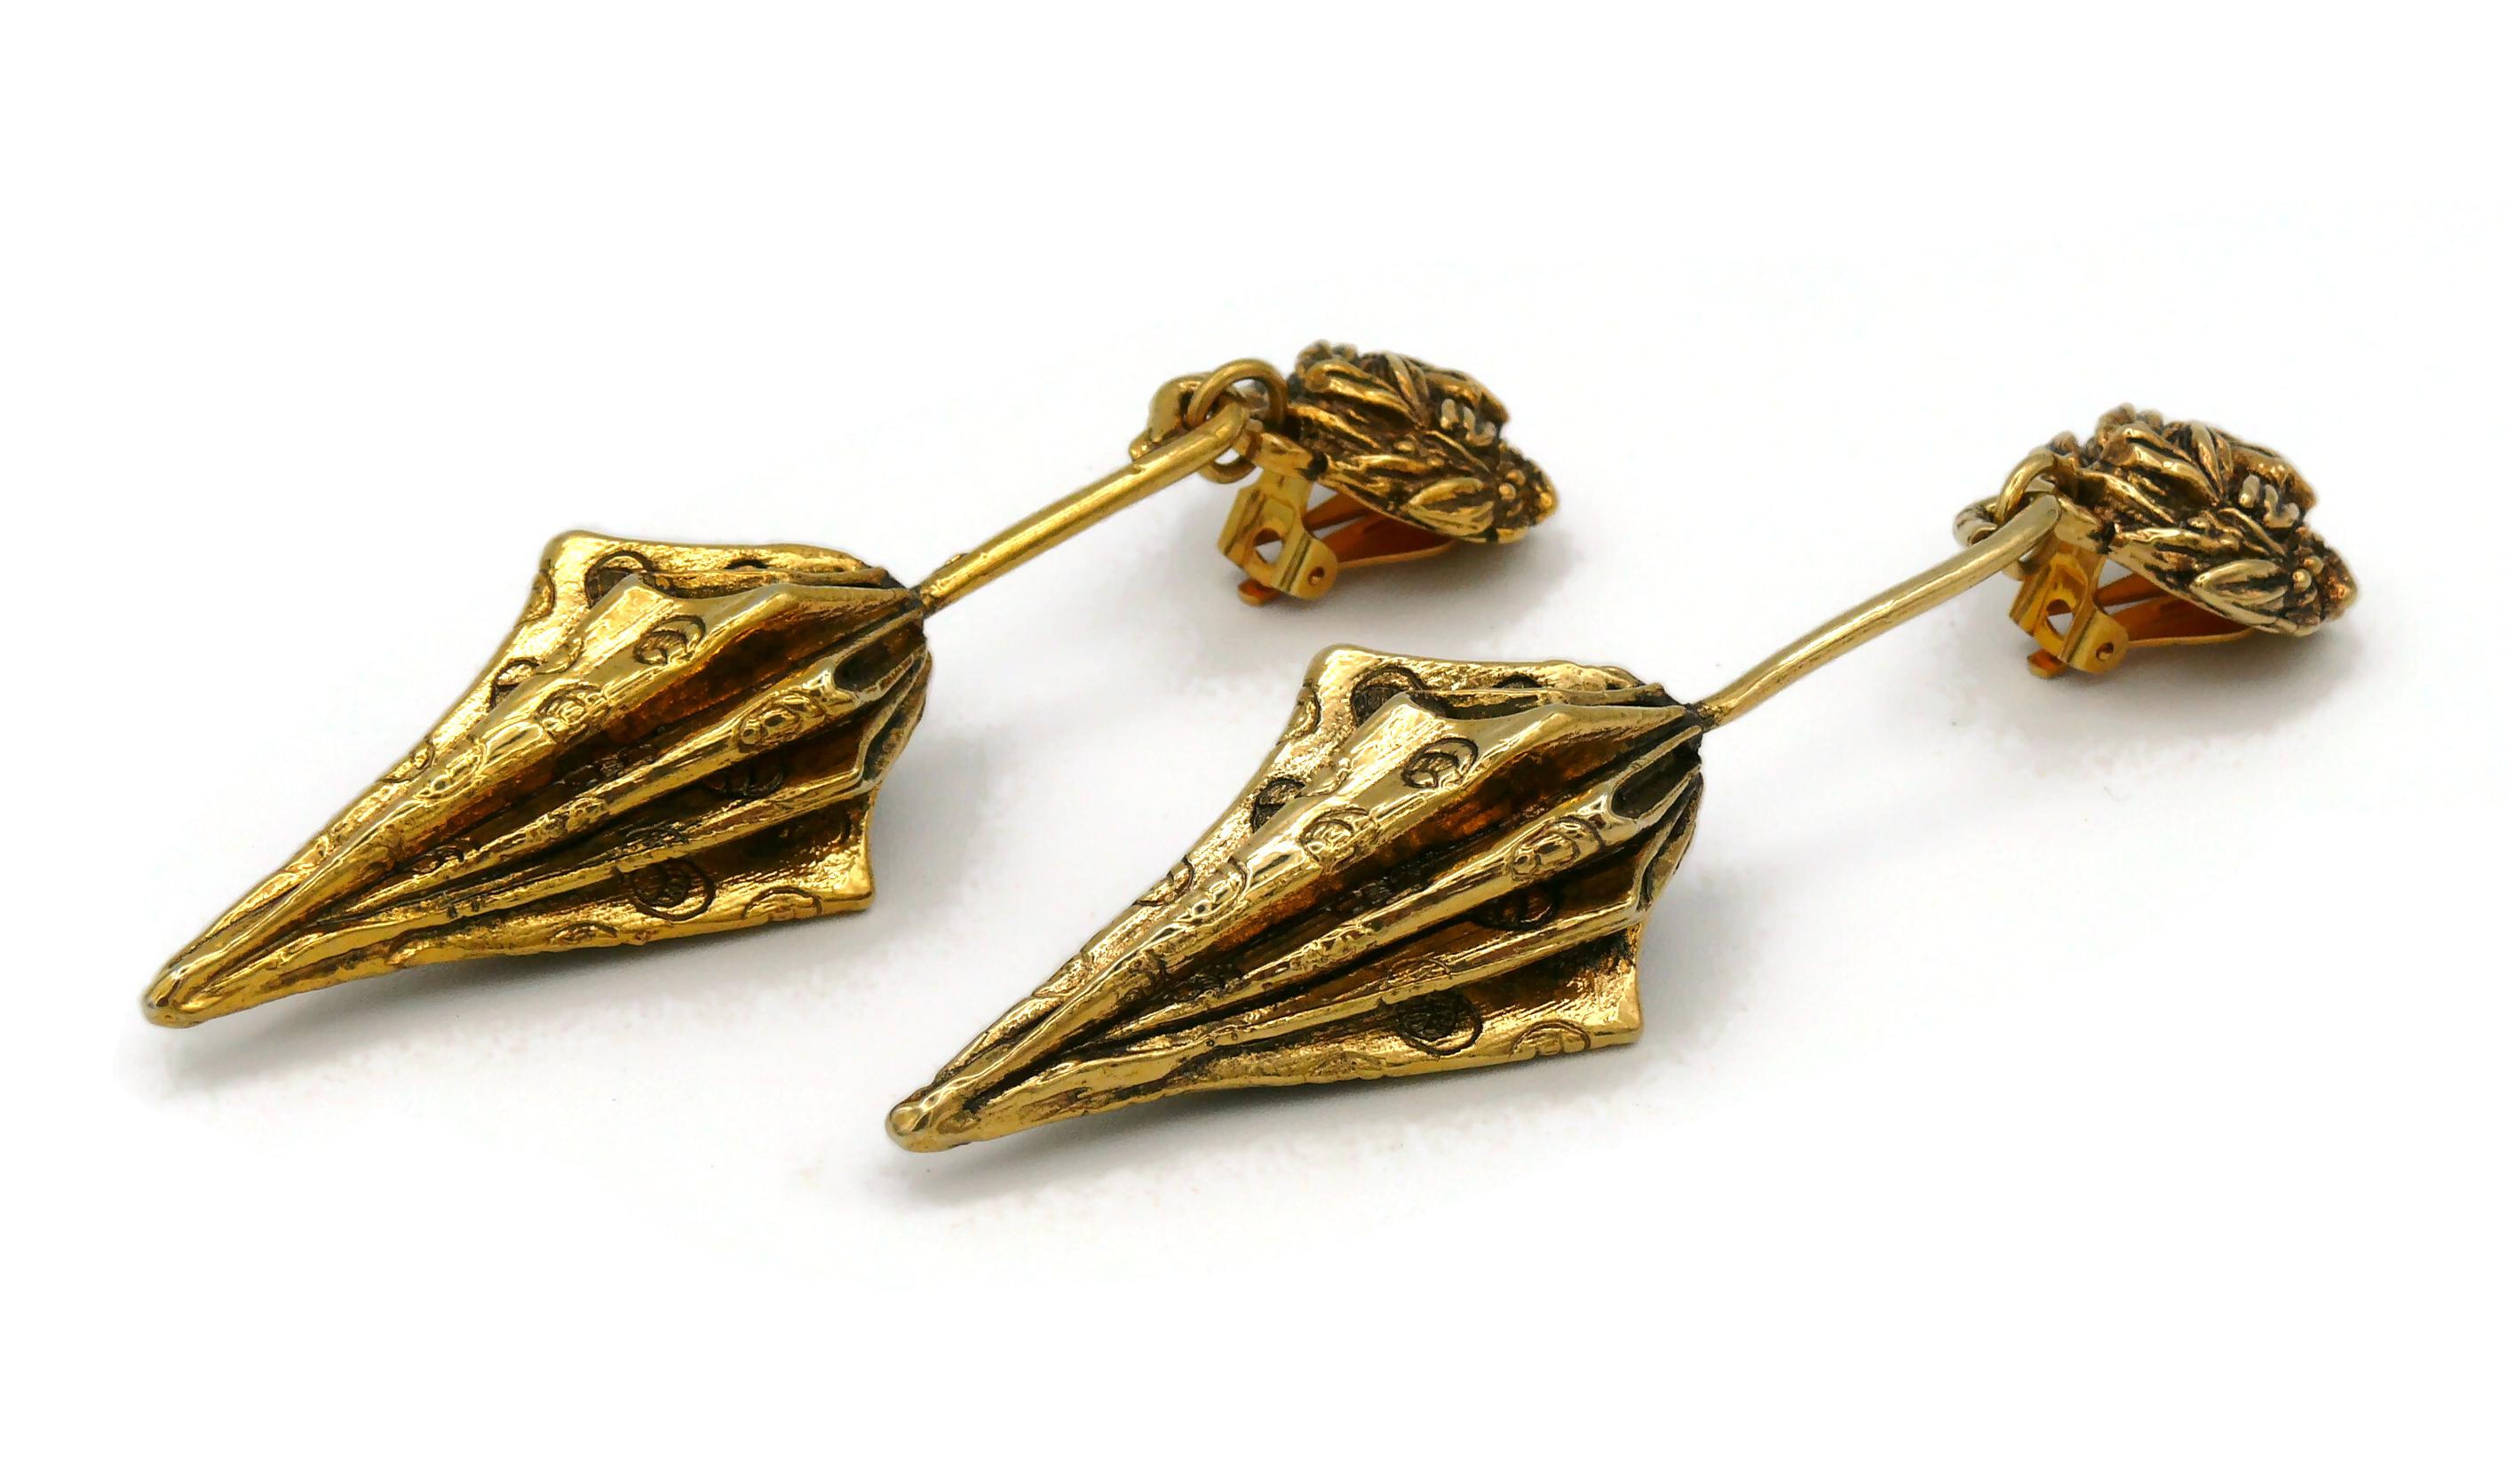 Chantal Thomass (Attributed to) Vintage Umbrella Dangling Earrings For Sale 4